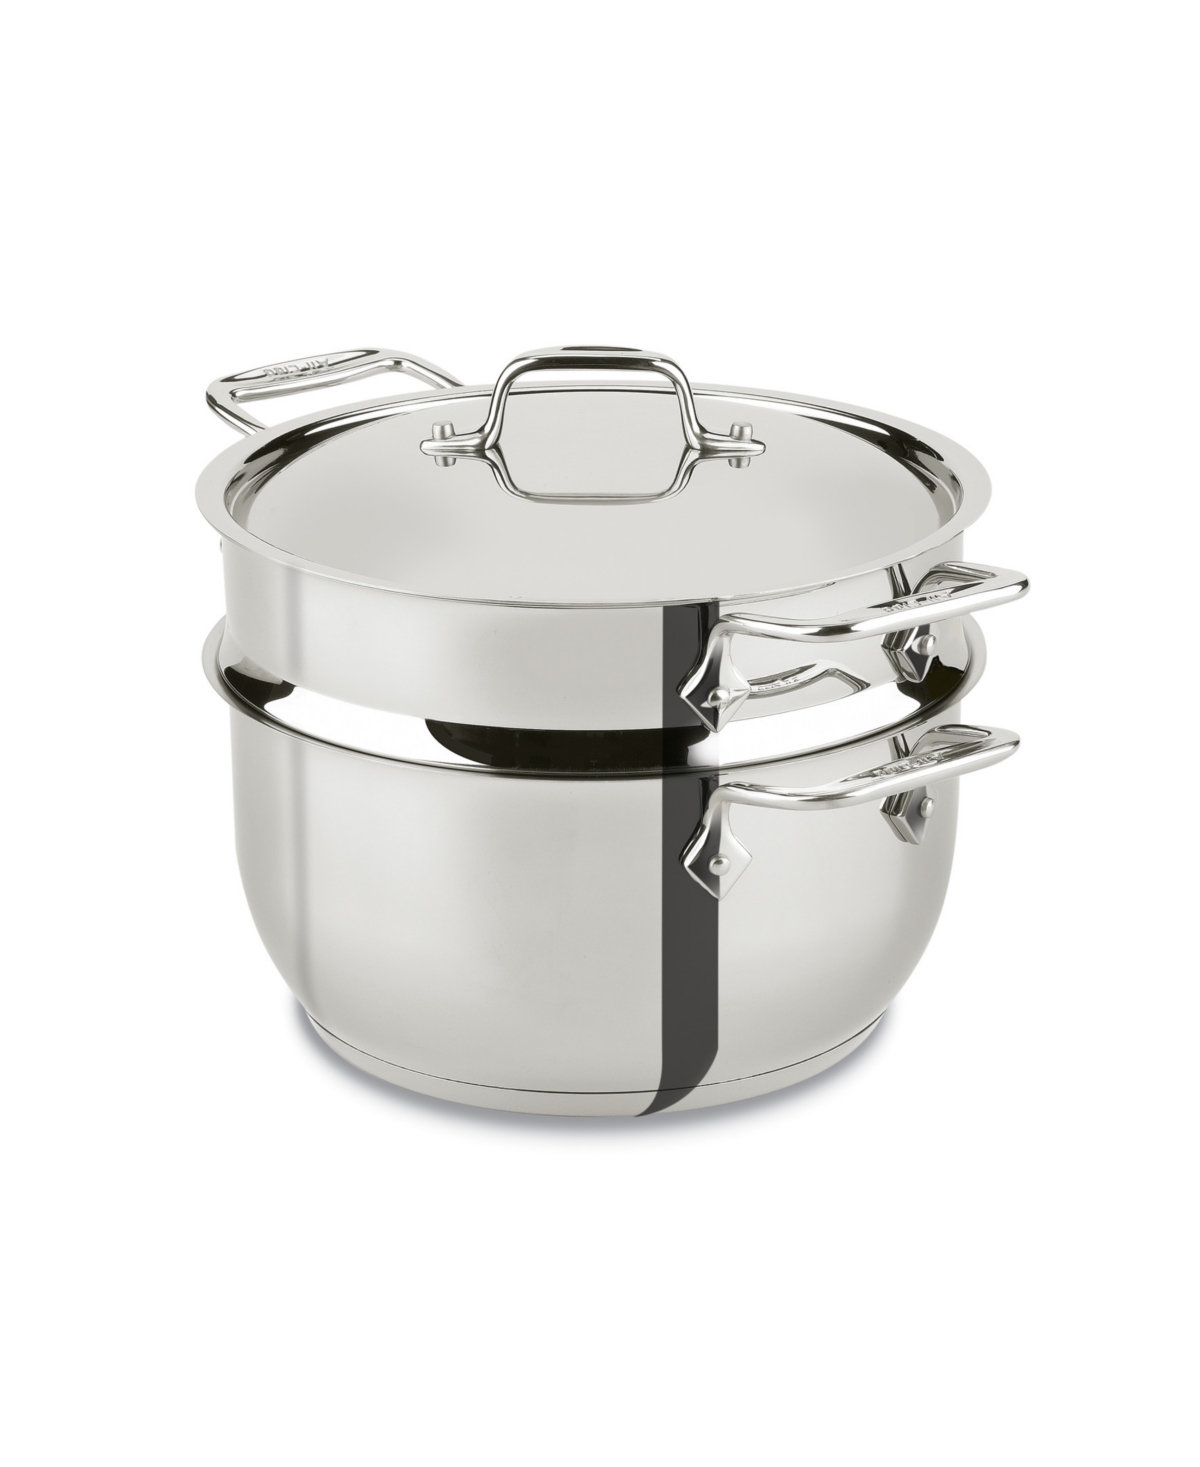 All-clad Stainless Steel 5 Qt. Covered Multi Pot With Steamer Insert In Silver-tone